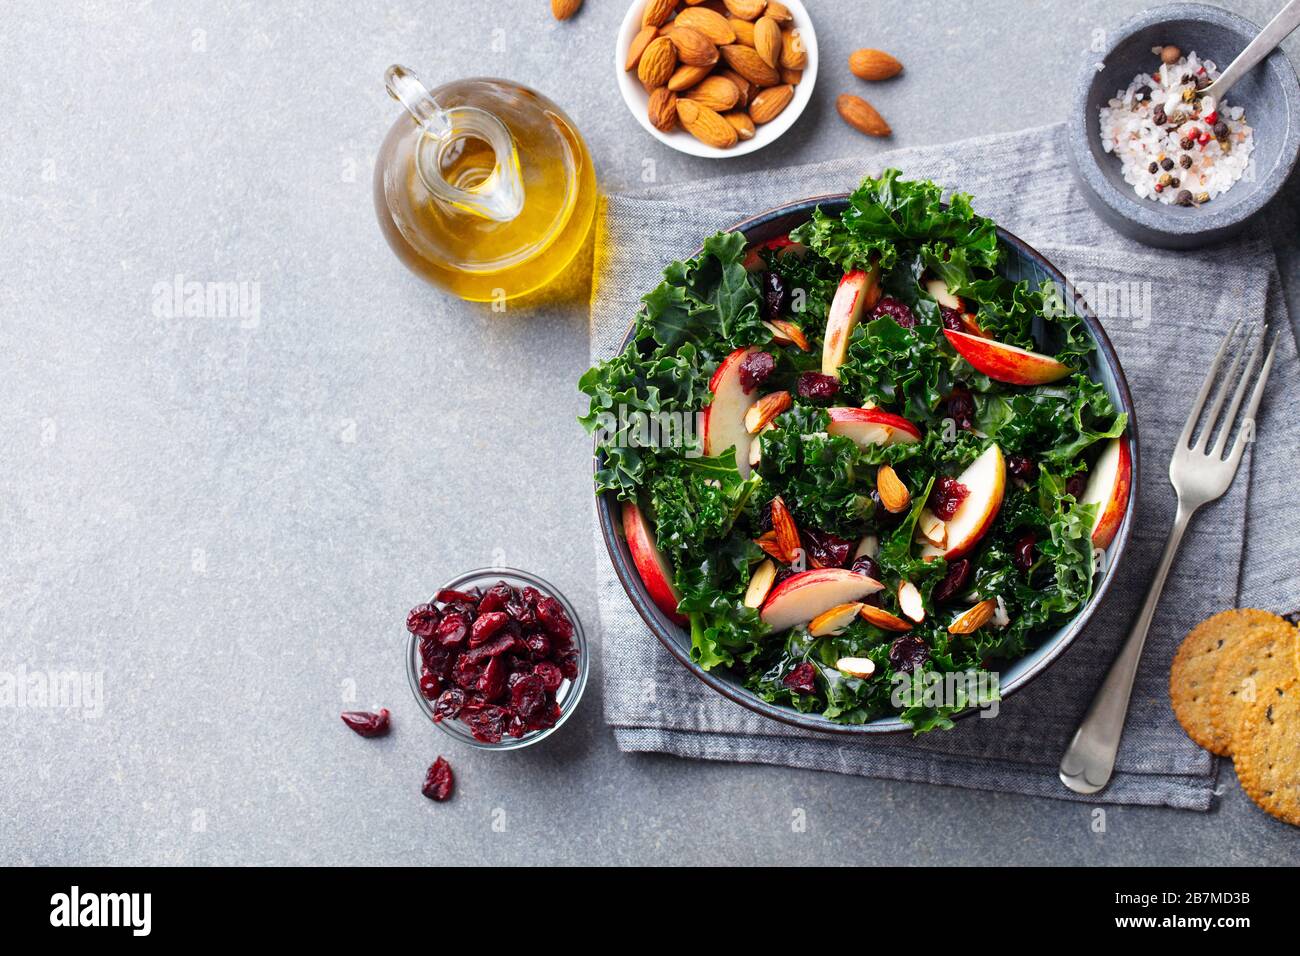 Kale salad with apples and nuts. Grey background. Copy space. Top view. Stock Photo